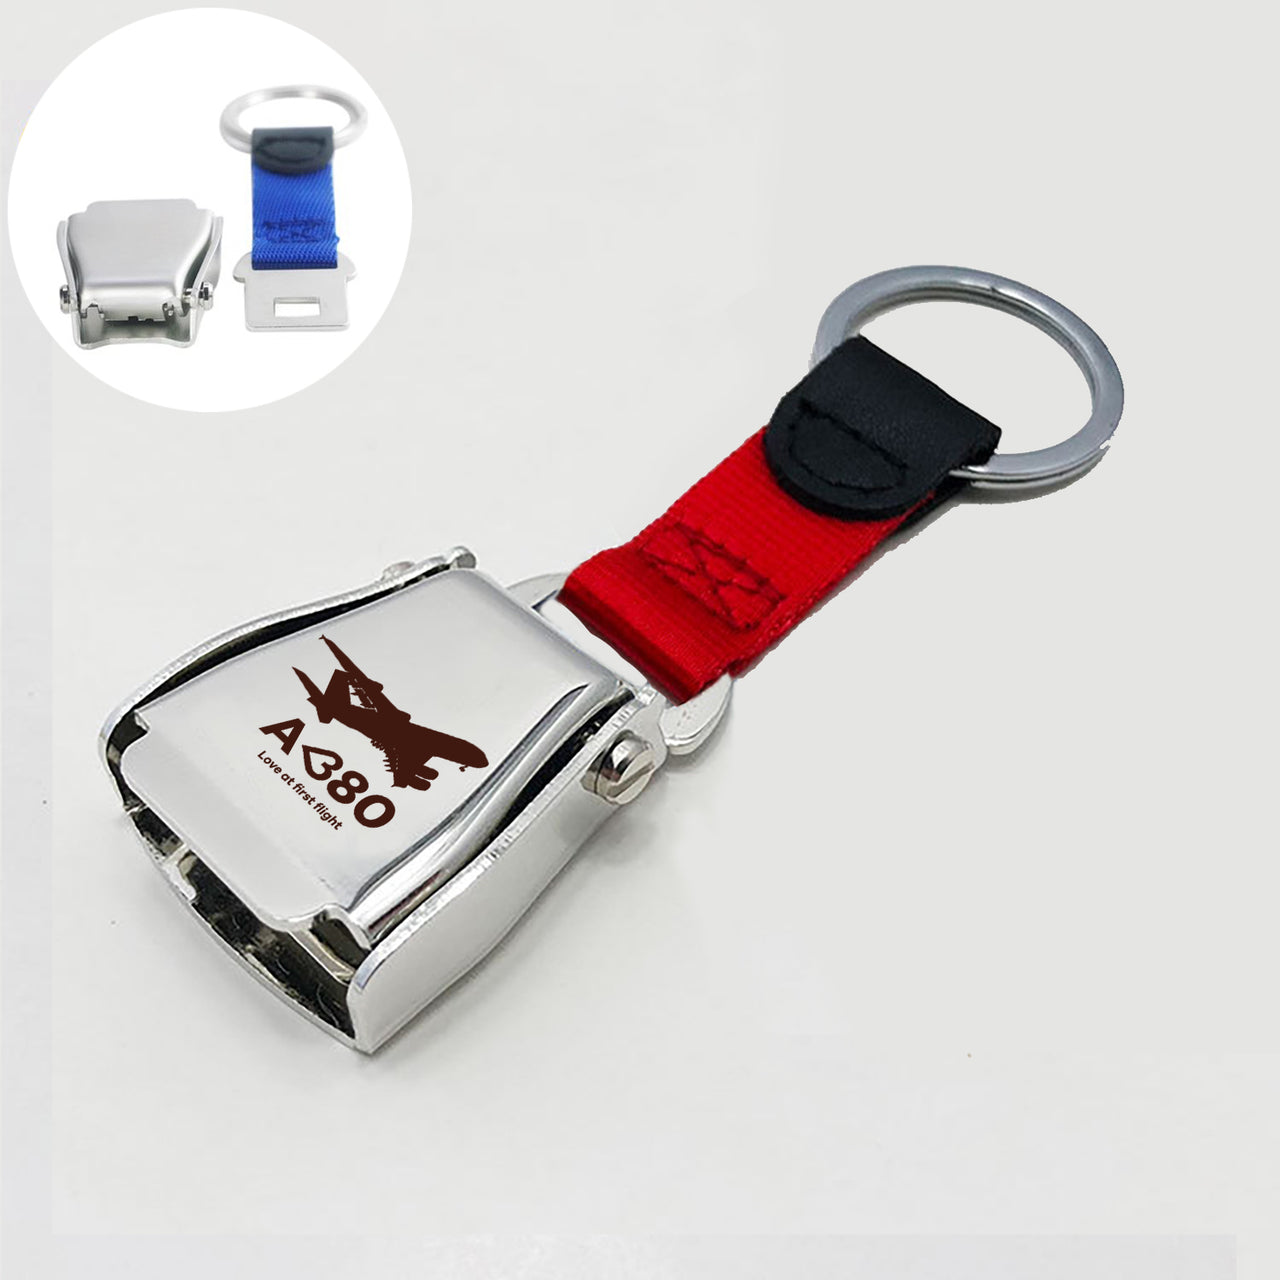 Airbus A380 Love at first flight Designed Airplane Seat Belt Key Chains